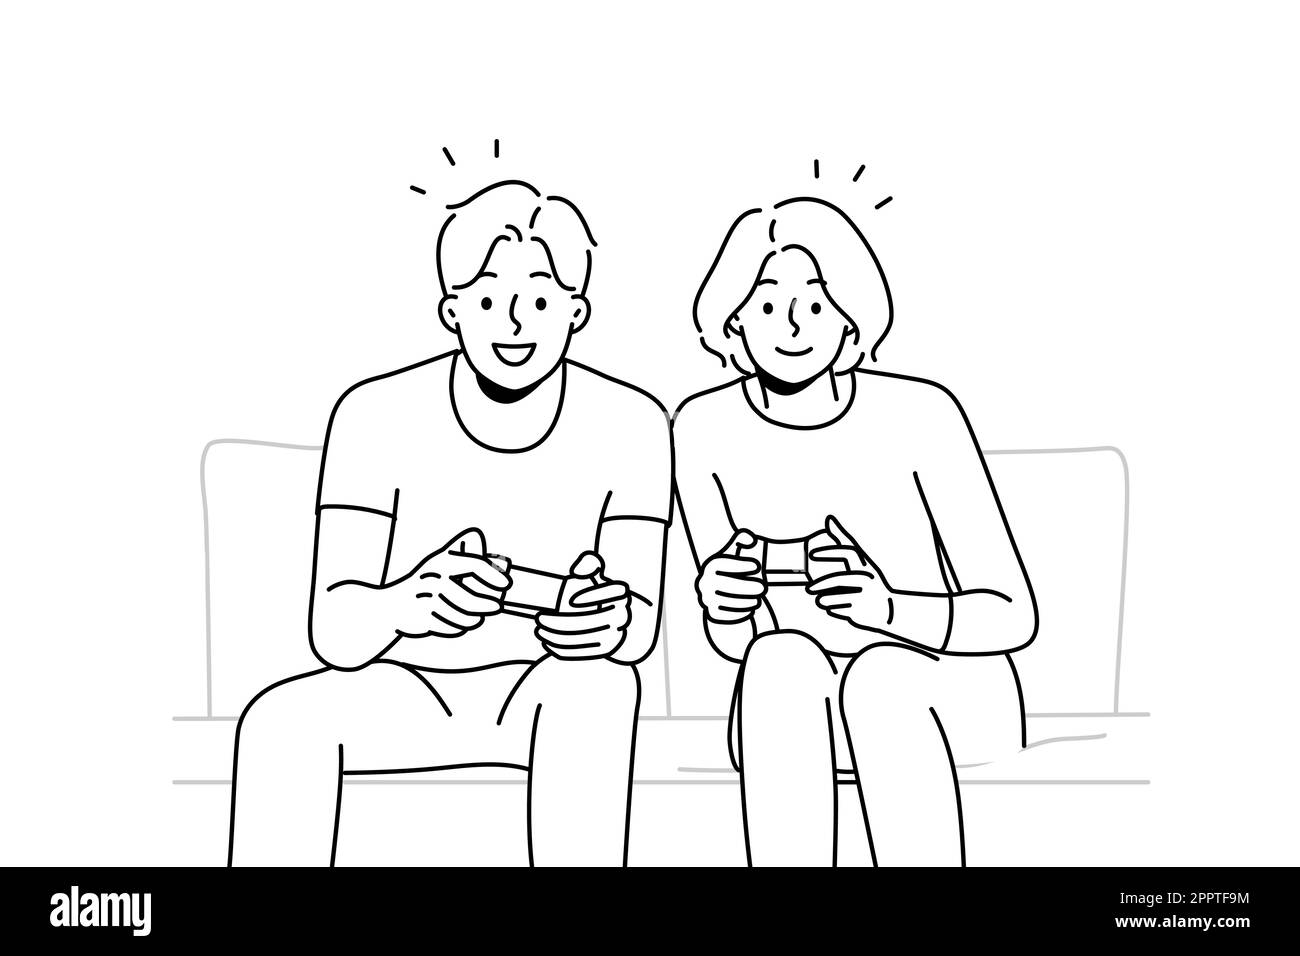 Smiling couple playing video games Stock Vector